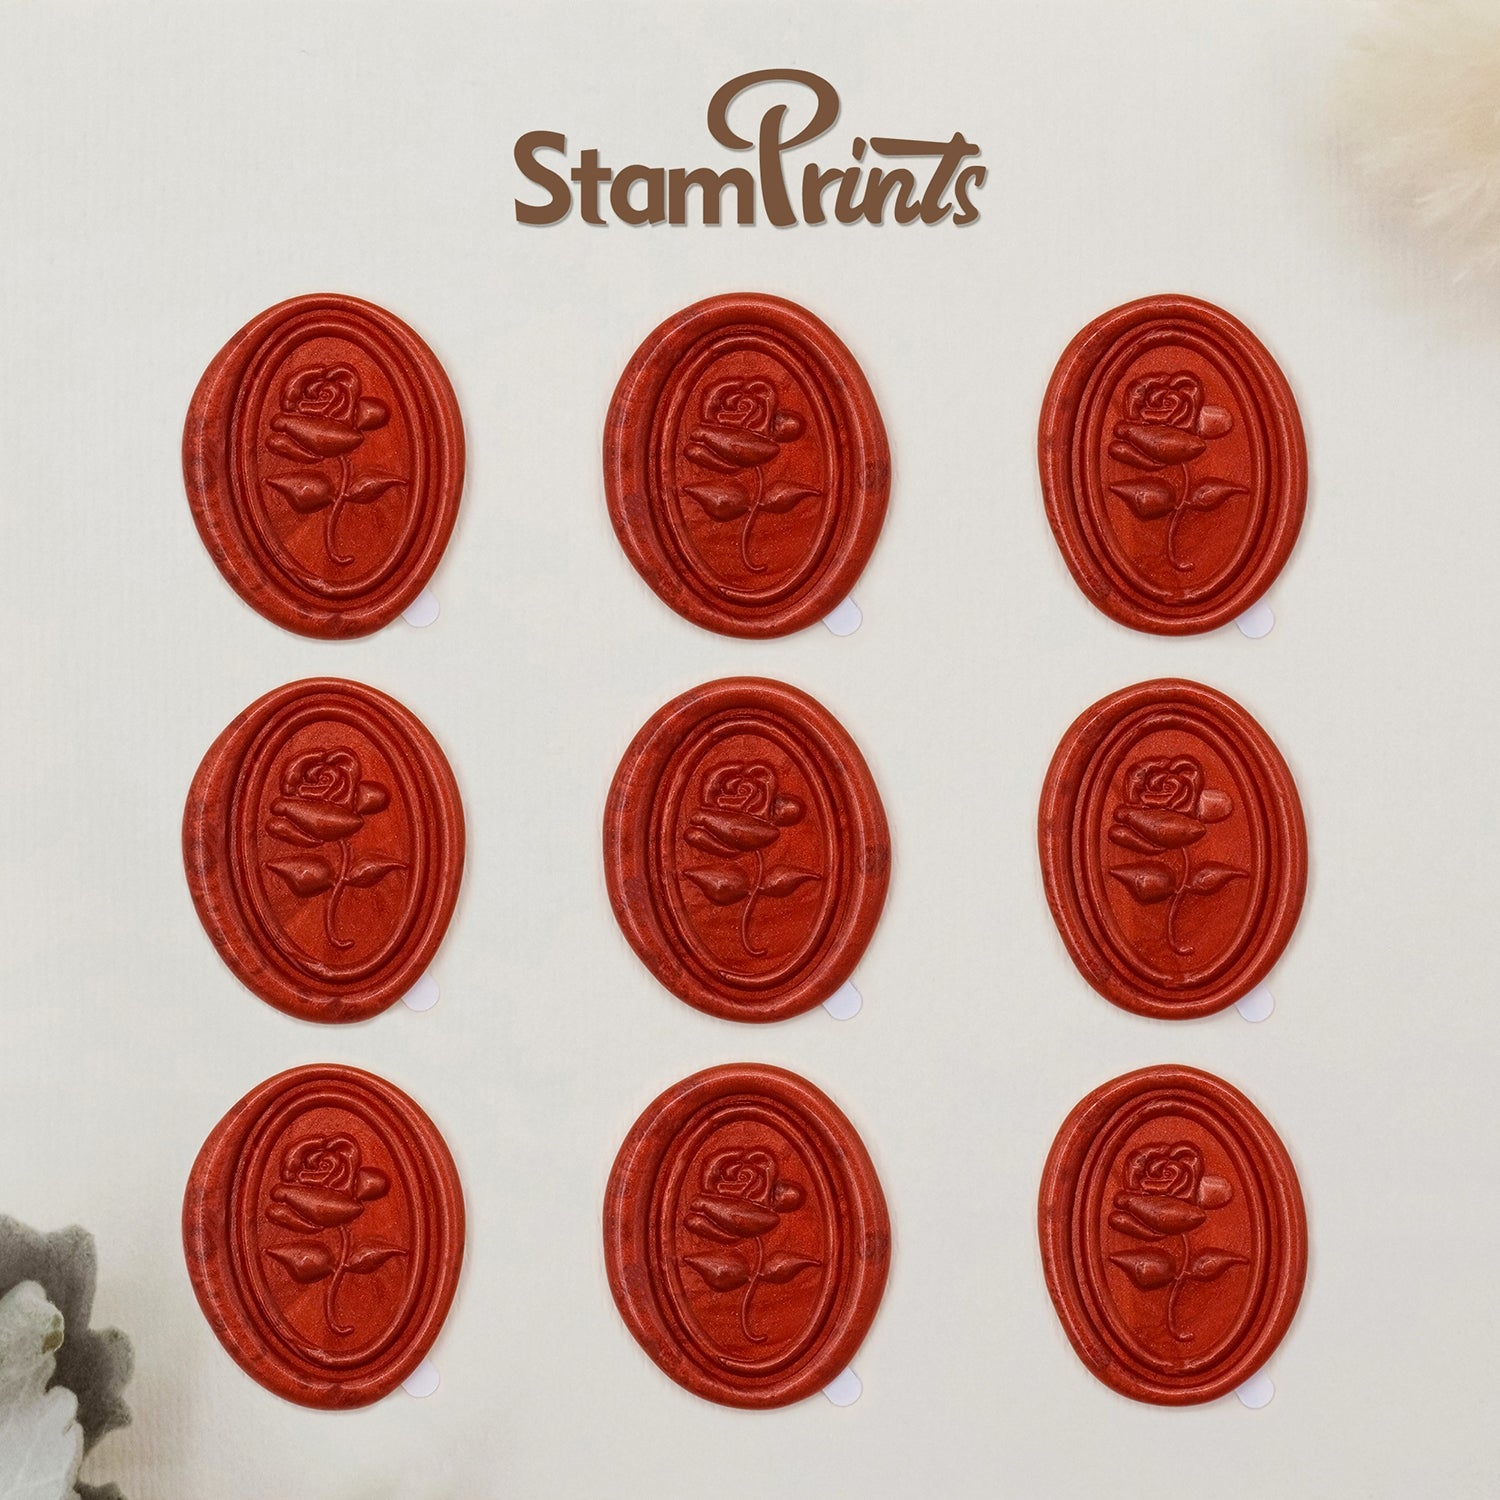 Stamprints 3D Relief Rose Self-adhesive Wax Seal Stickers 2